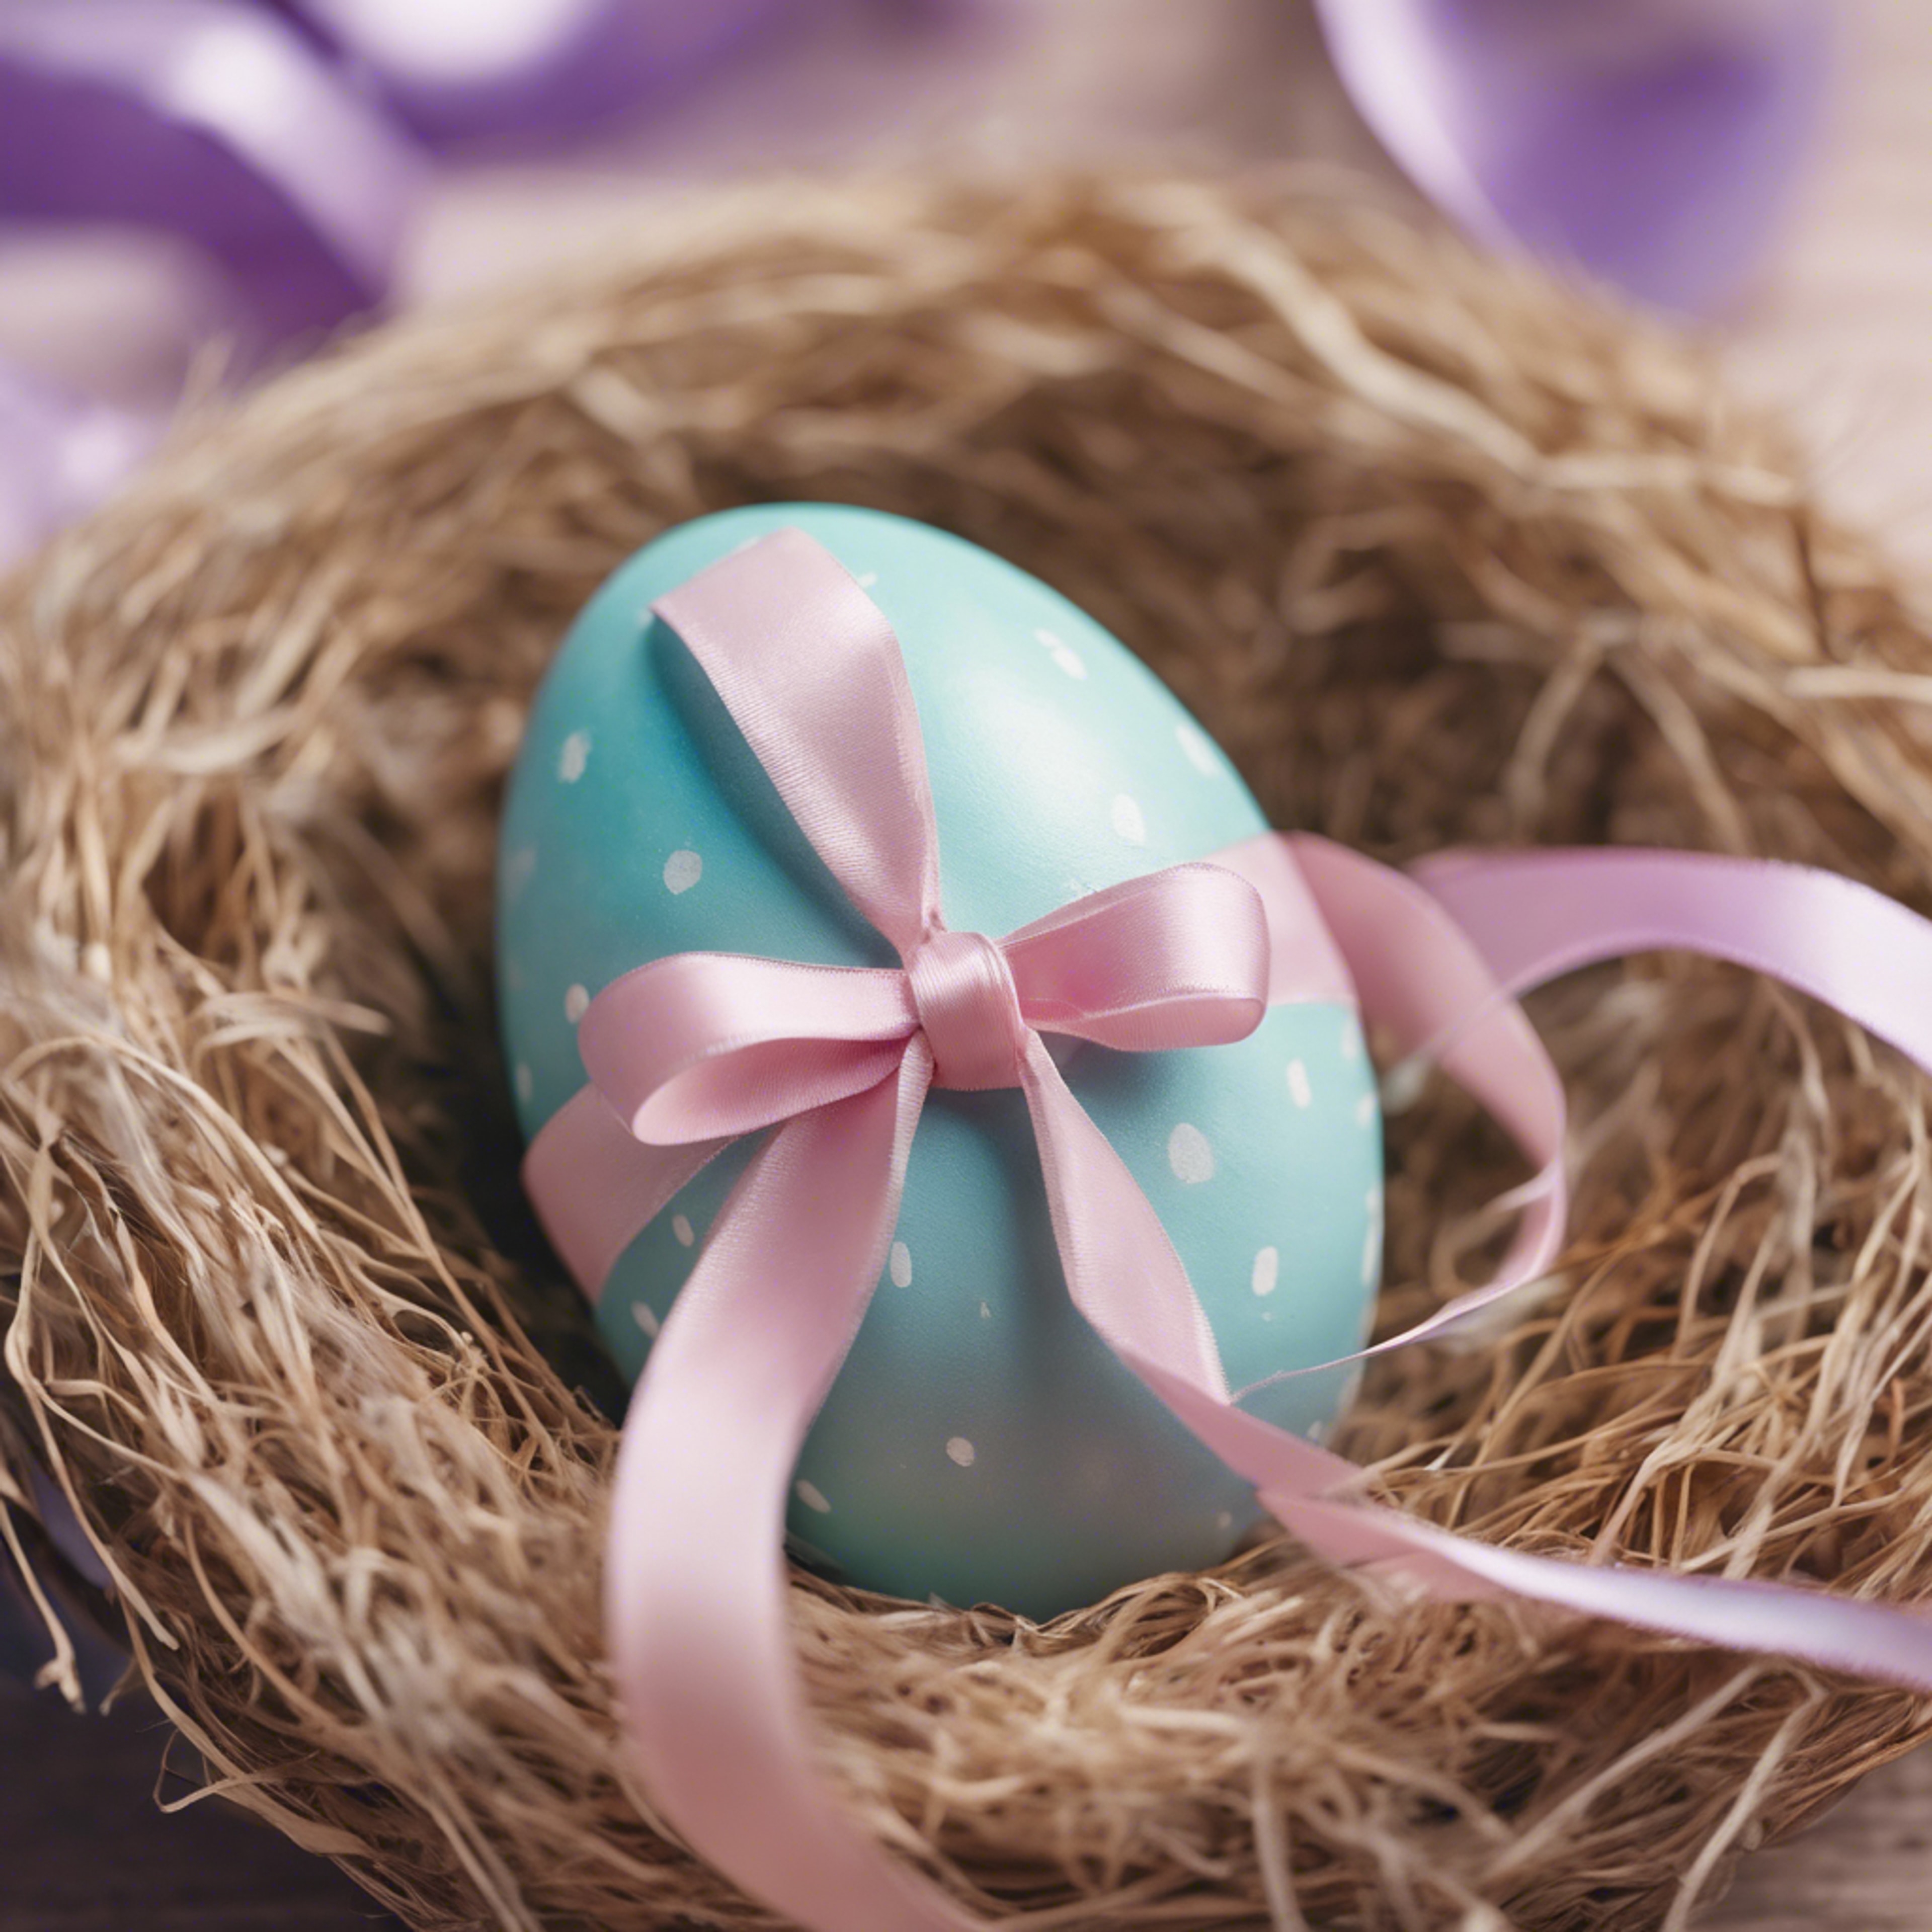 Close-up image of a pastel-colored Easter egg with ribbon details, on a nest. ផ្ទាំង​រូបភាព[582f95aee8b94a49b4e5]